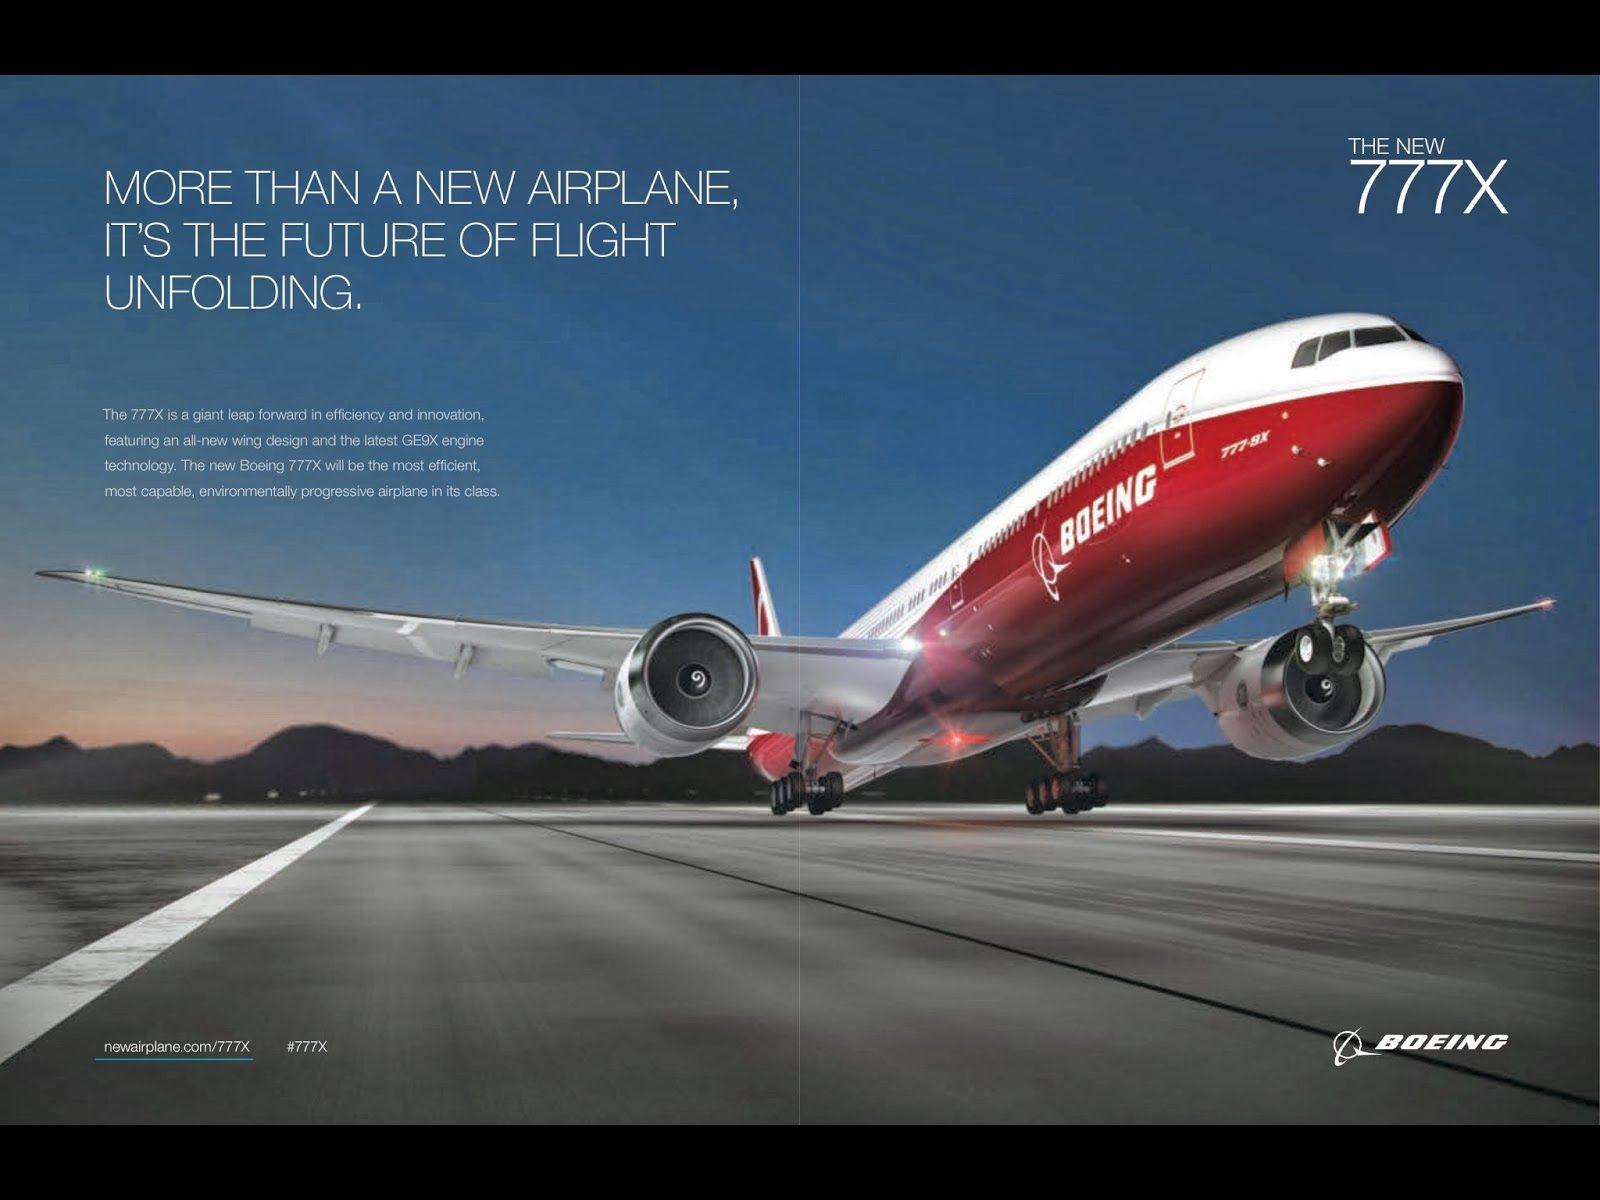 A350 XWB News: The 777X has more orders and commitments than